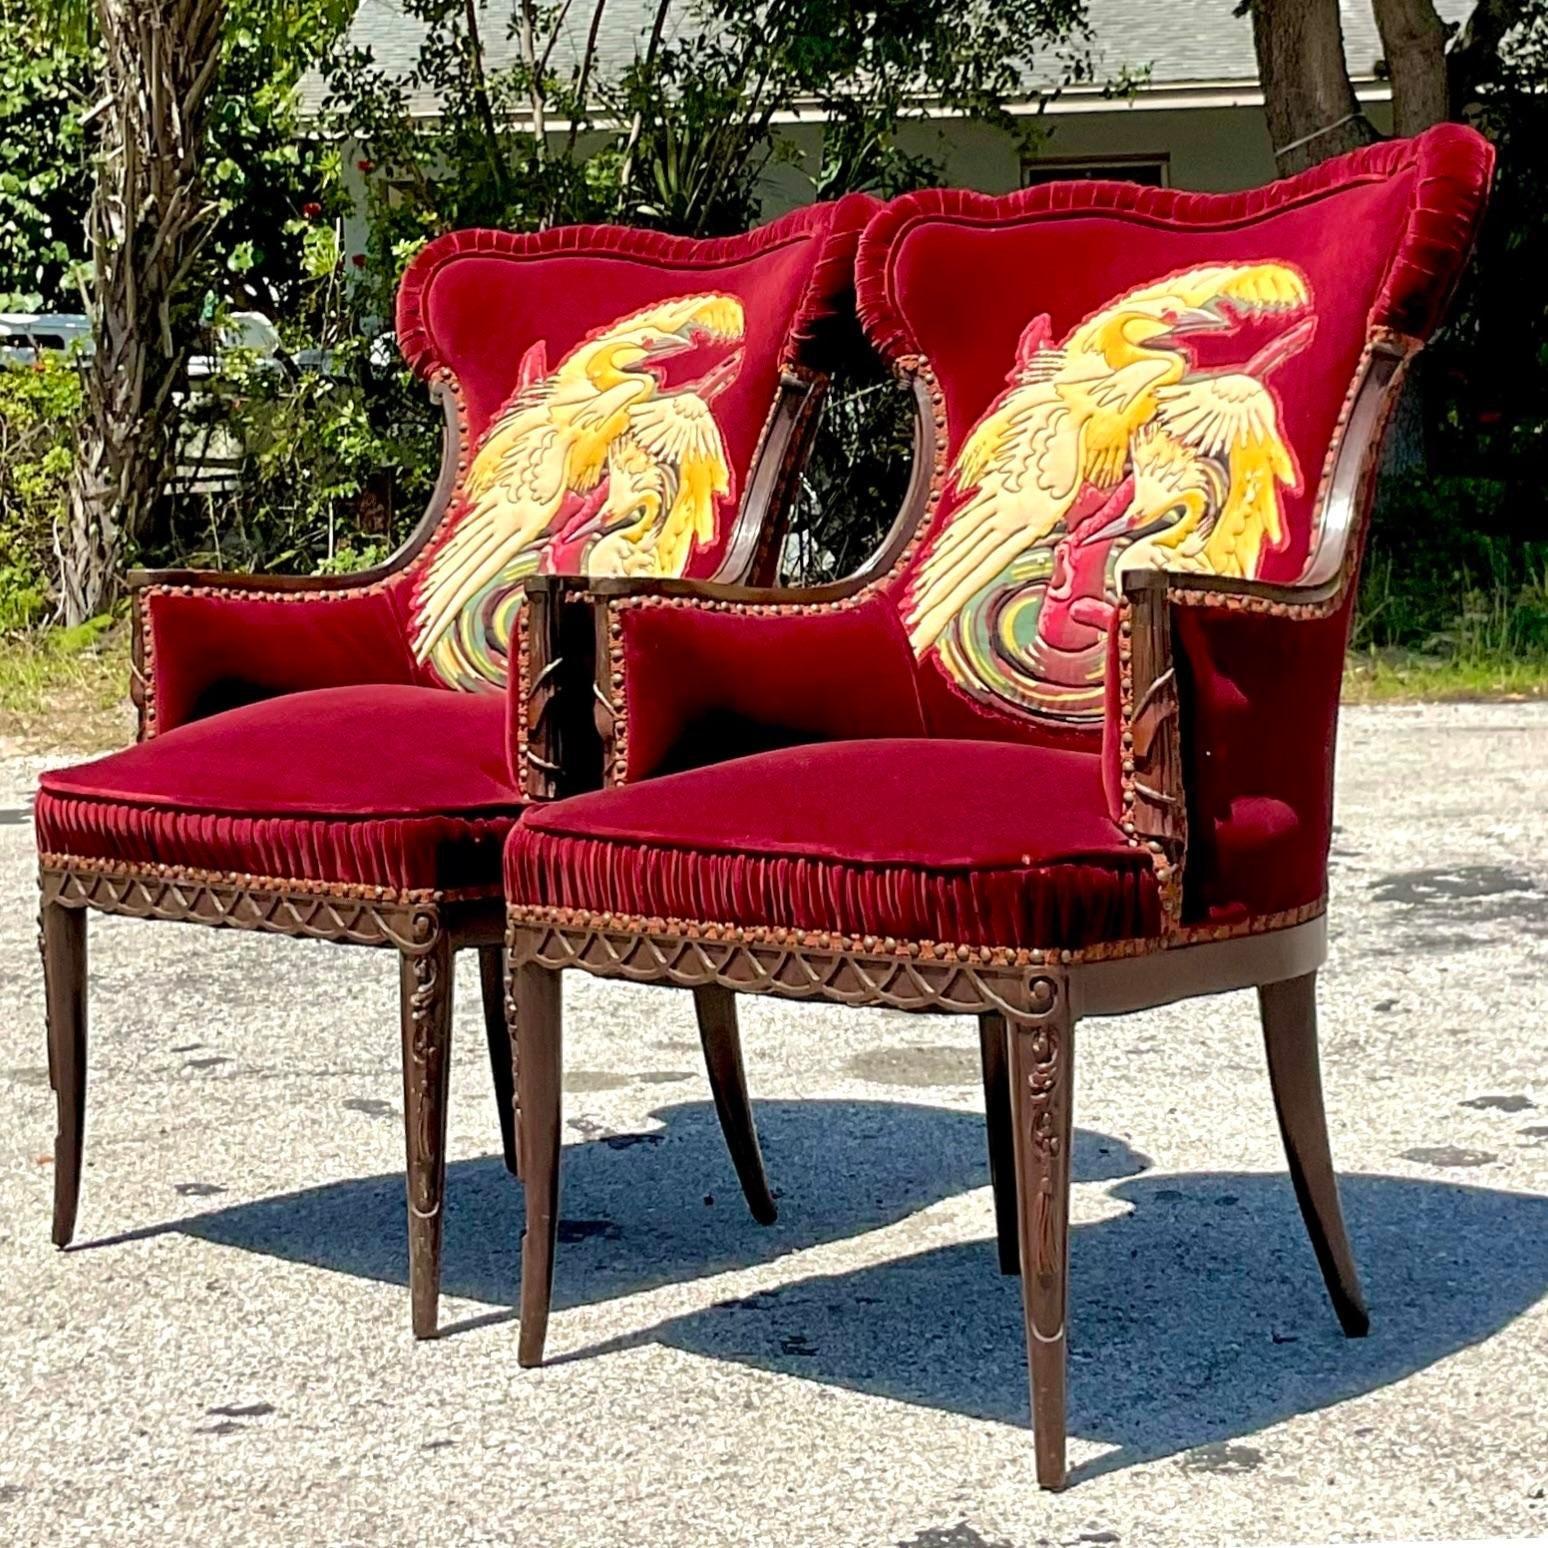 Chinoiserie Vintage Boho Ruched Velvet Crane Arm Chairs - a Pair For Sale